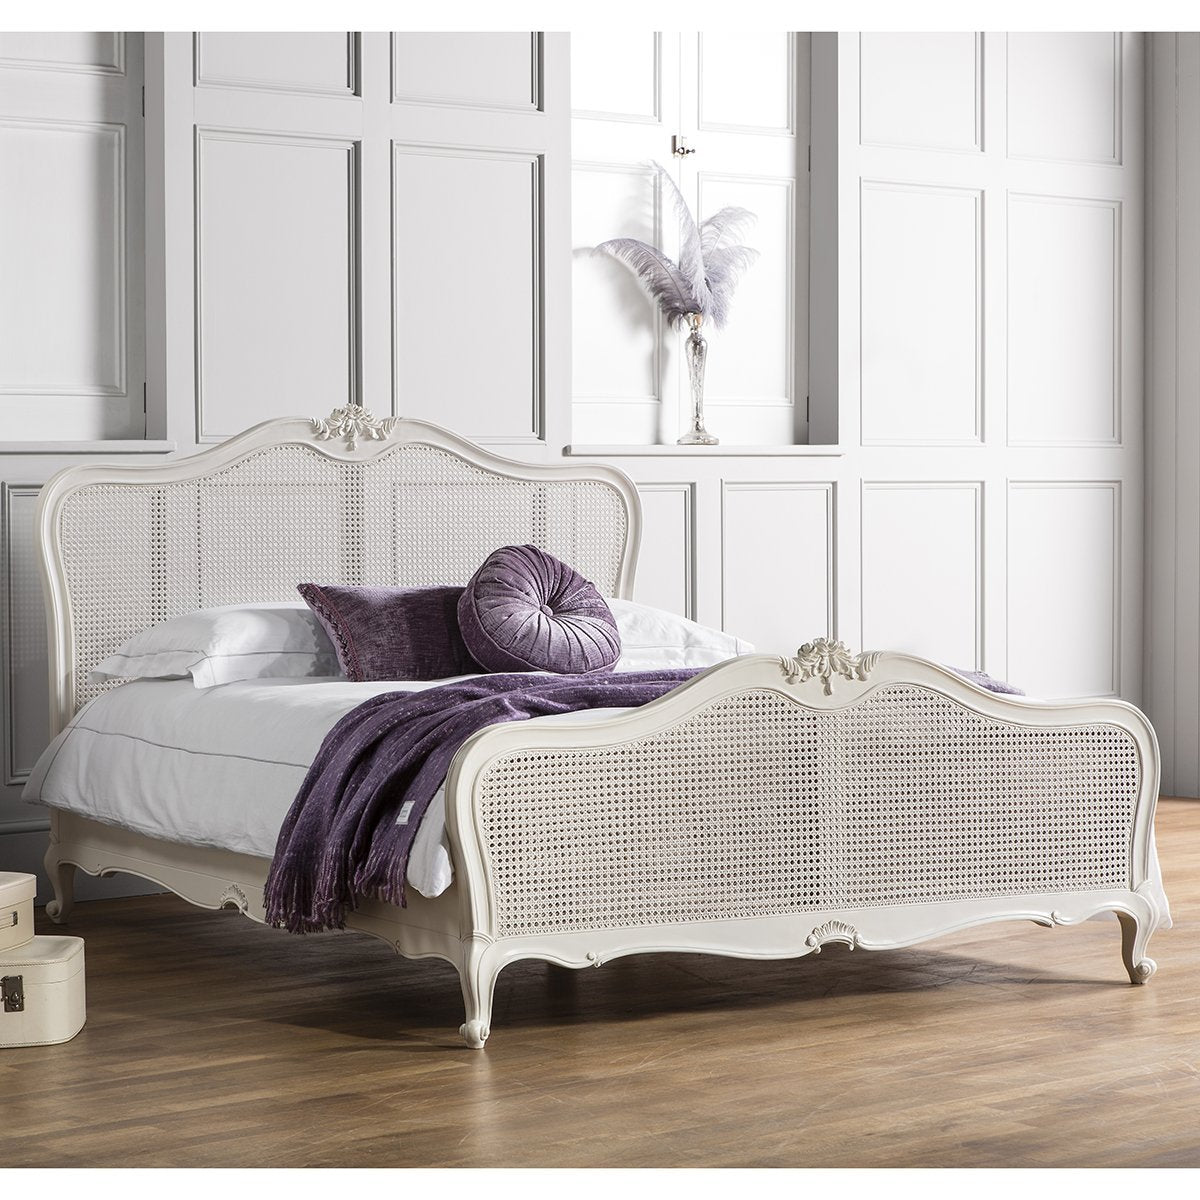 Gallery Chic Cane King Size Bed in Off White-GalleryDirect-Olivia's